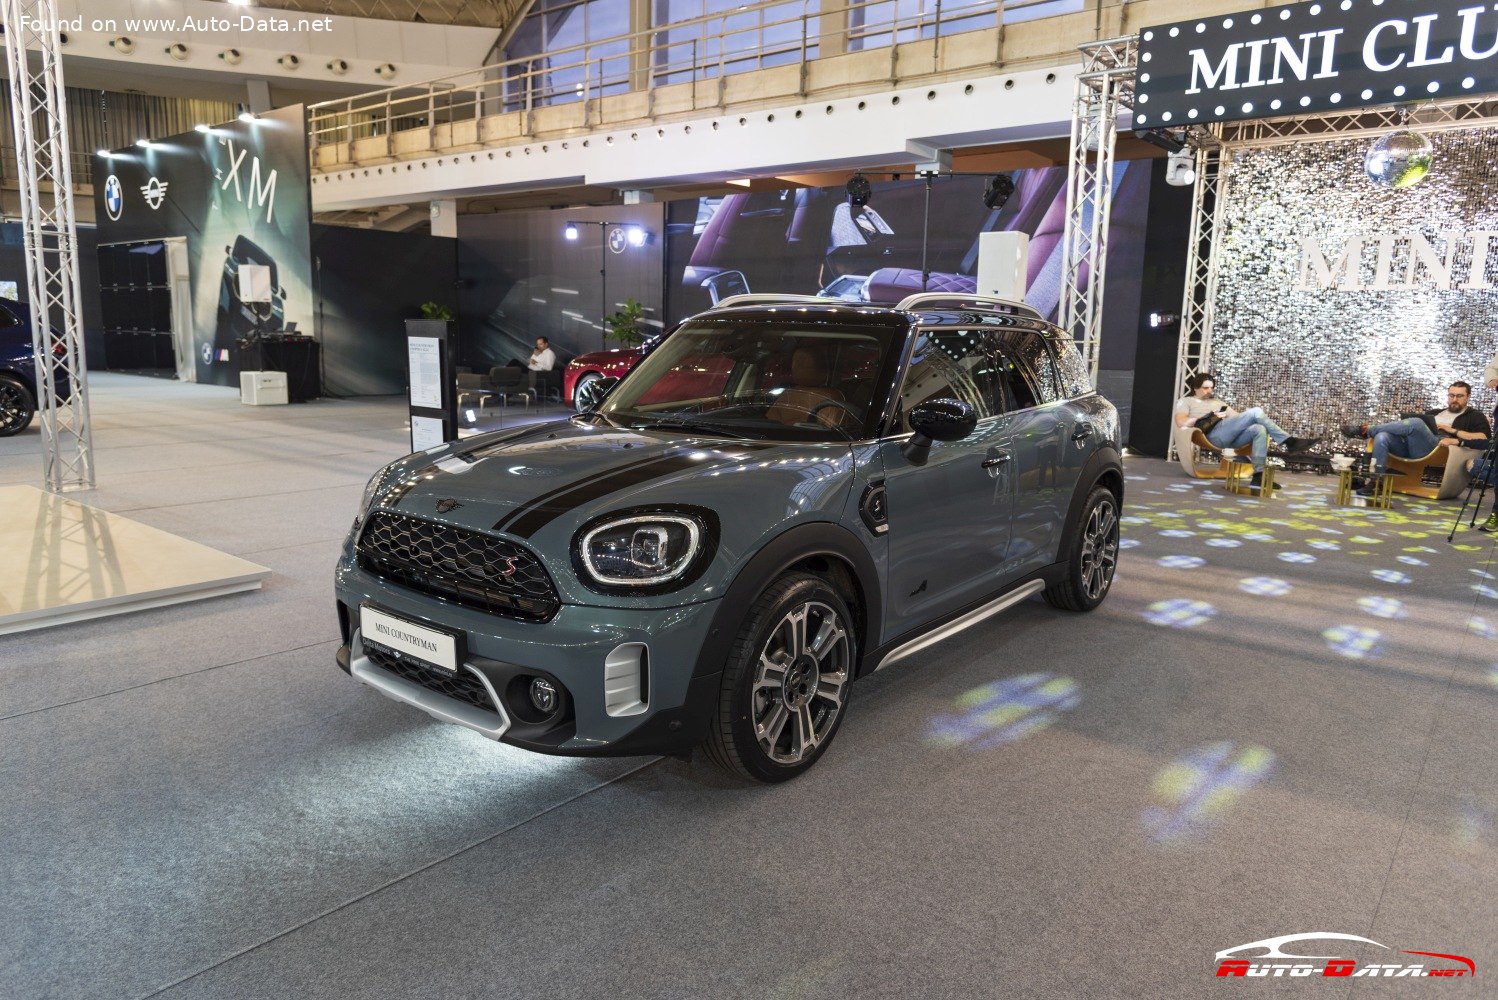 2020 Mini Countryman (F60, facelift 2020) Cooper S 2.0 (178 PS) ALL4  Steptronic